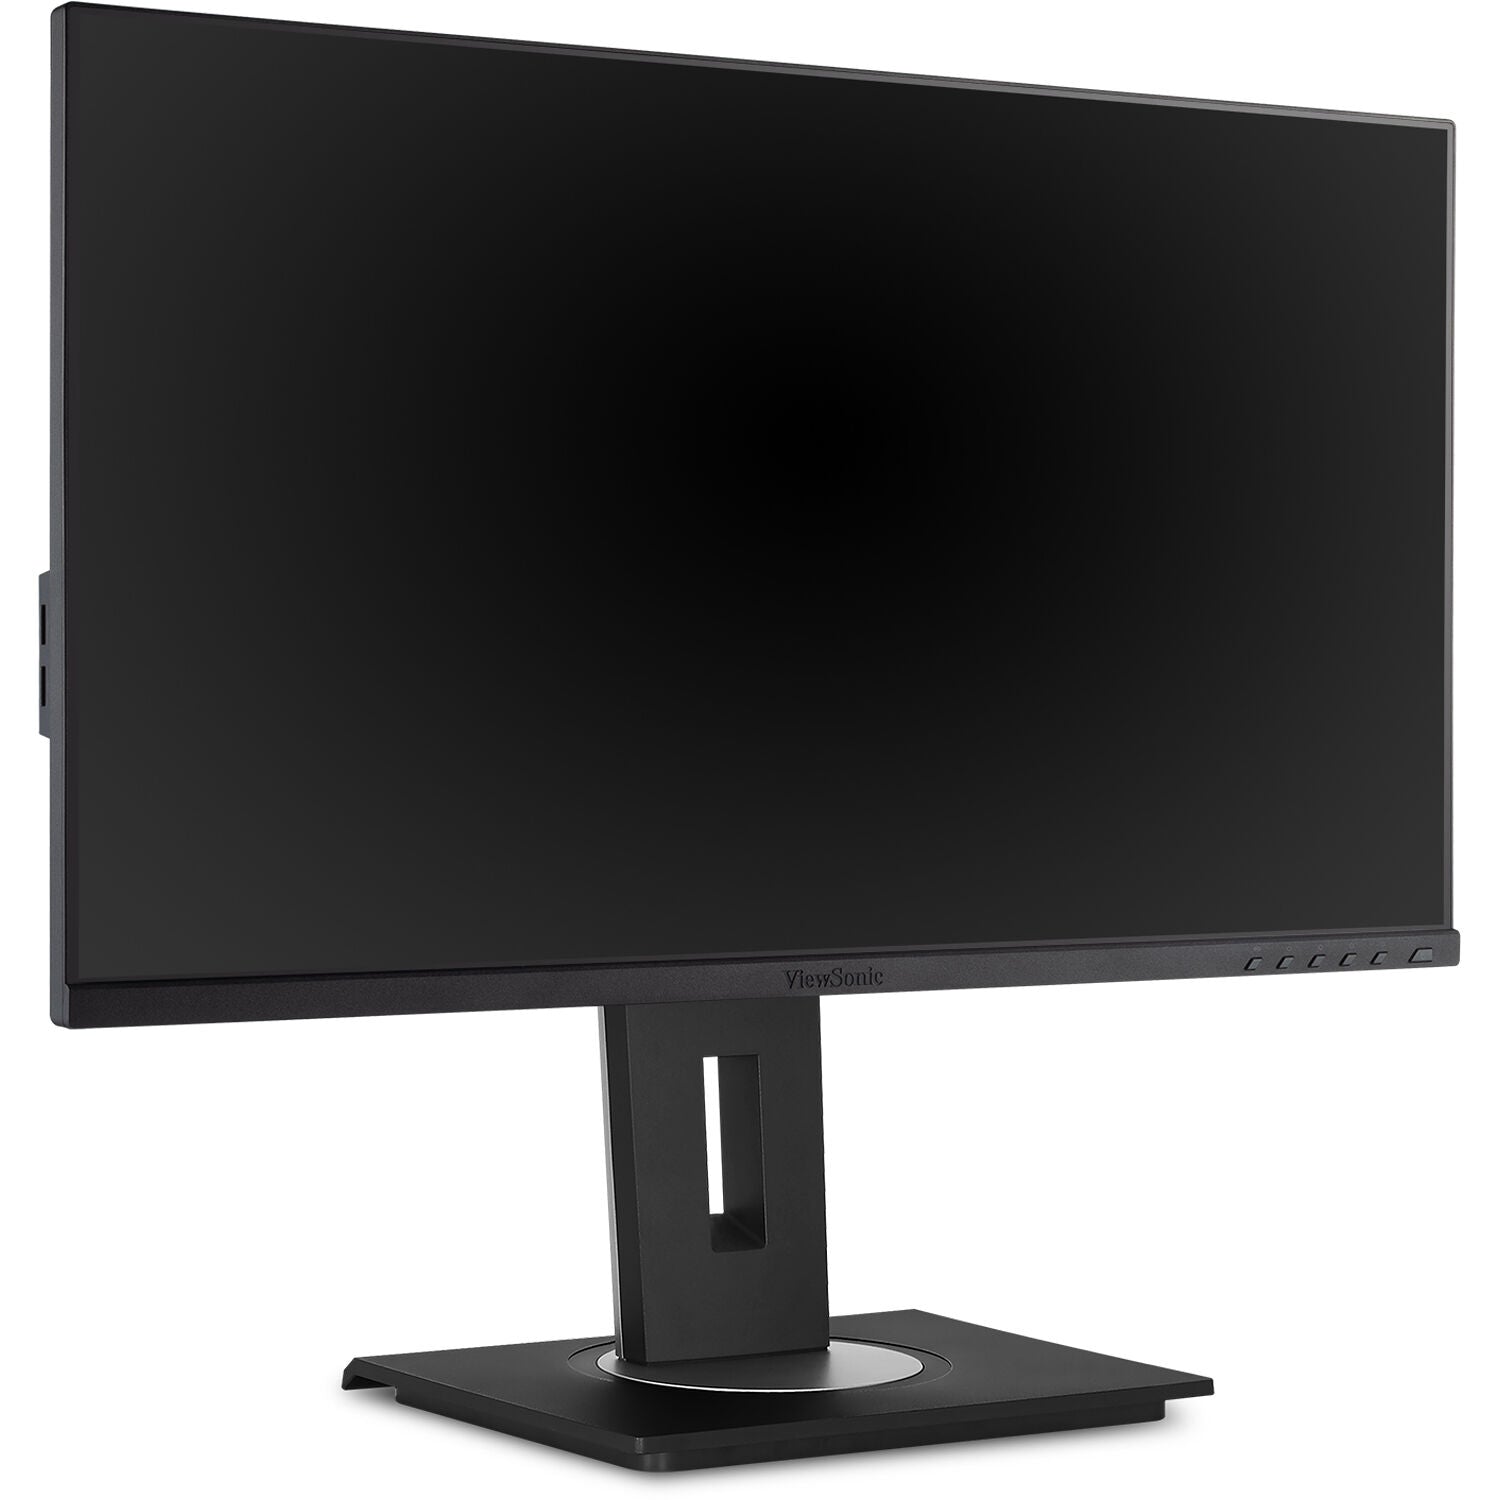 ViewSonic VG2448A-R 24" Ultra-Thin Bezels 40 Degree Tilt for Home and Office IPS 1080p Ergonomic Monitor - Certified Refurbished